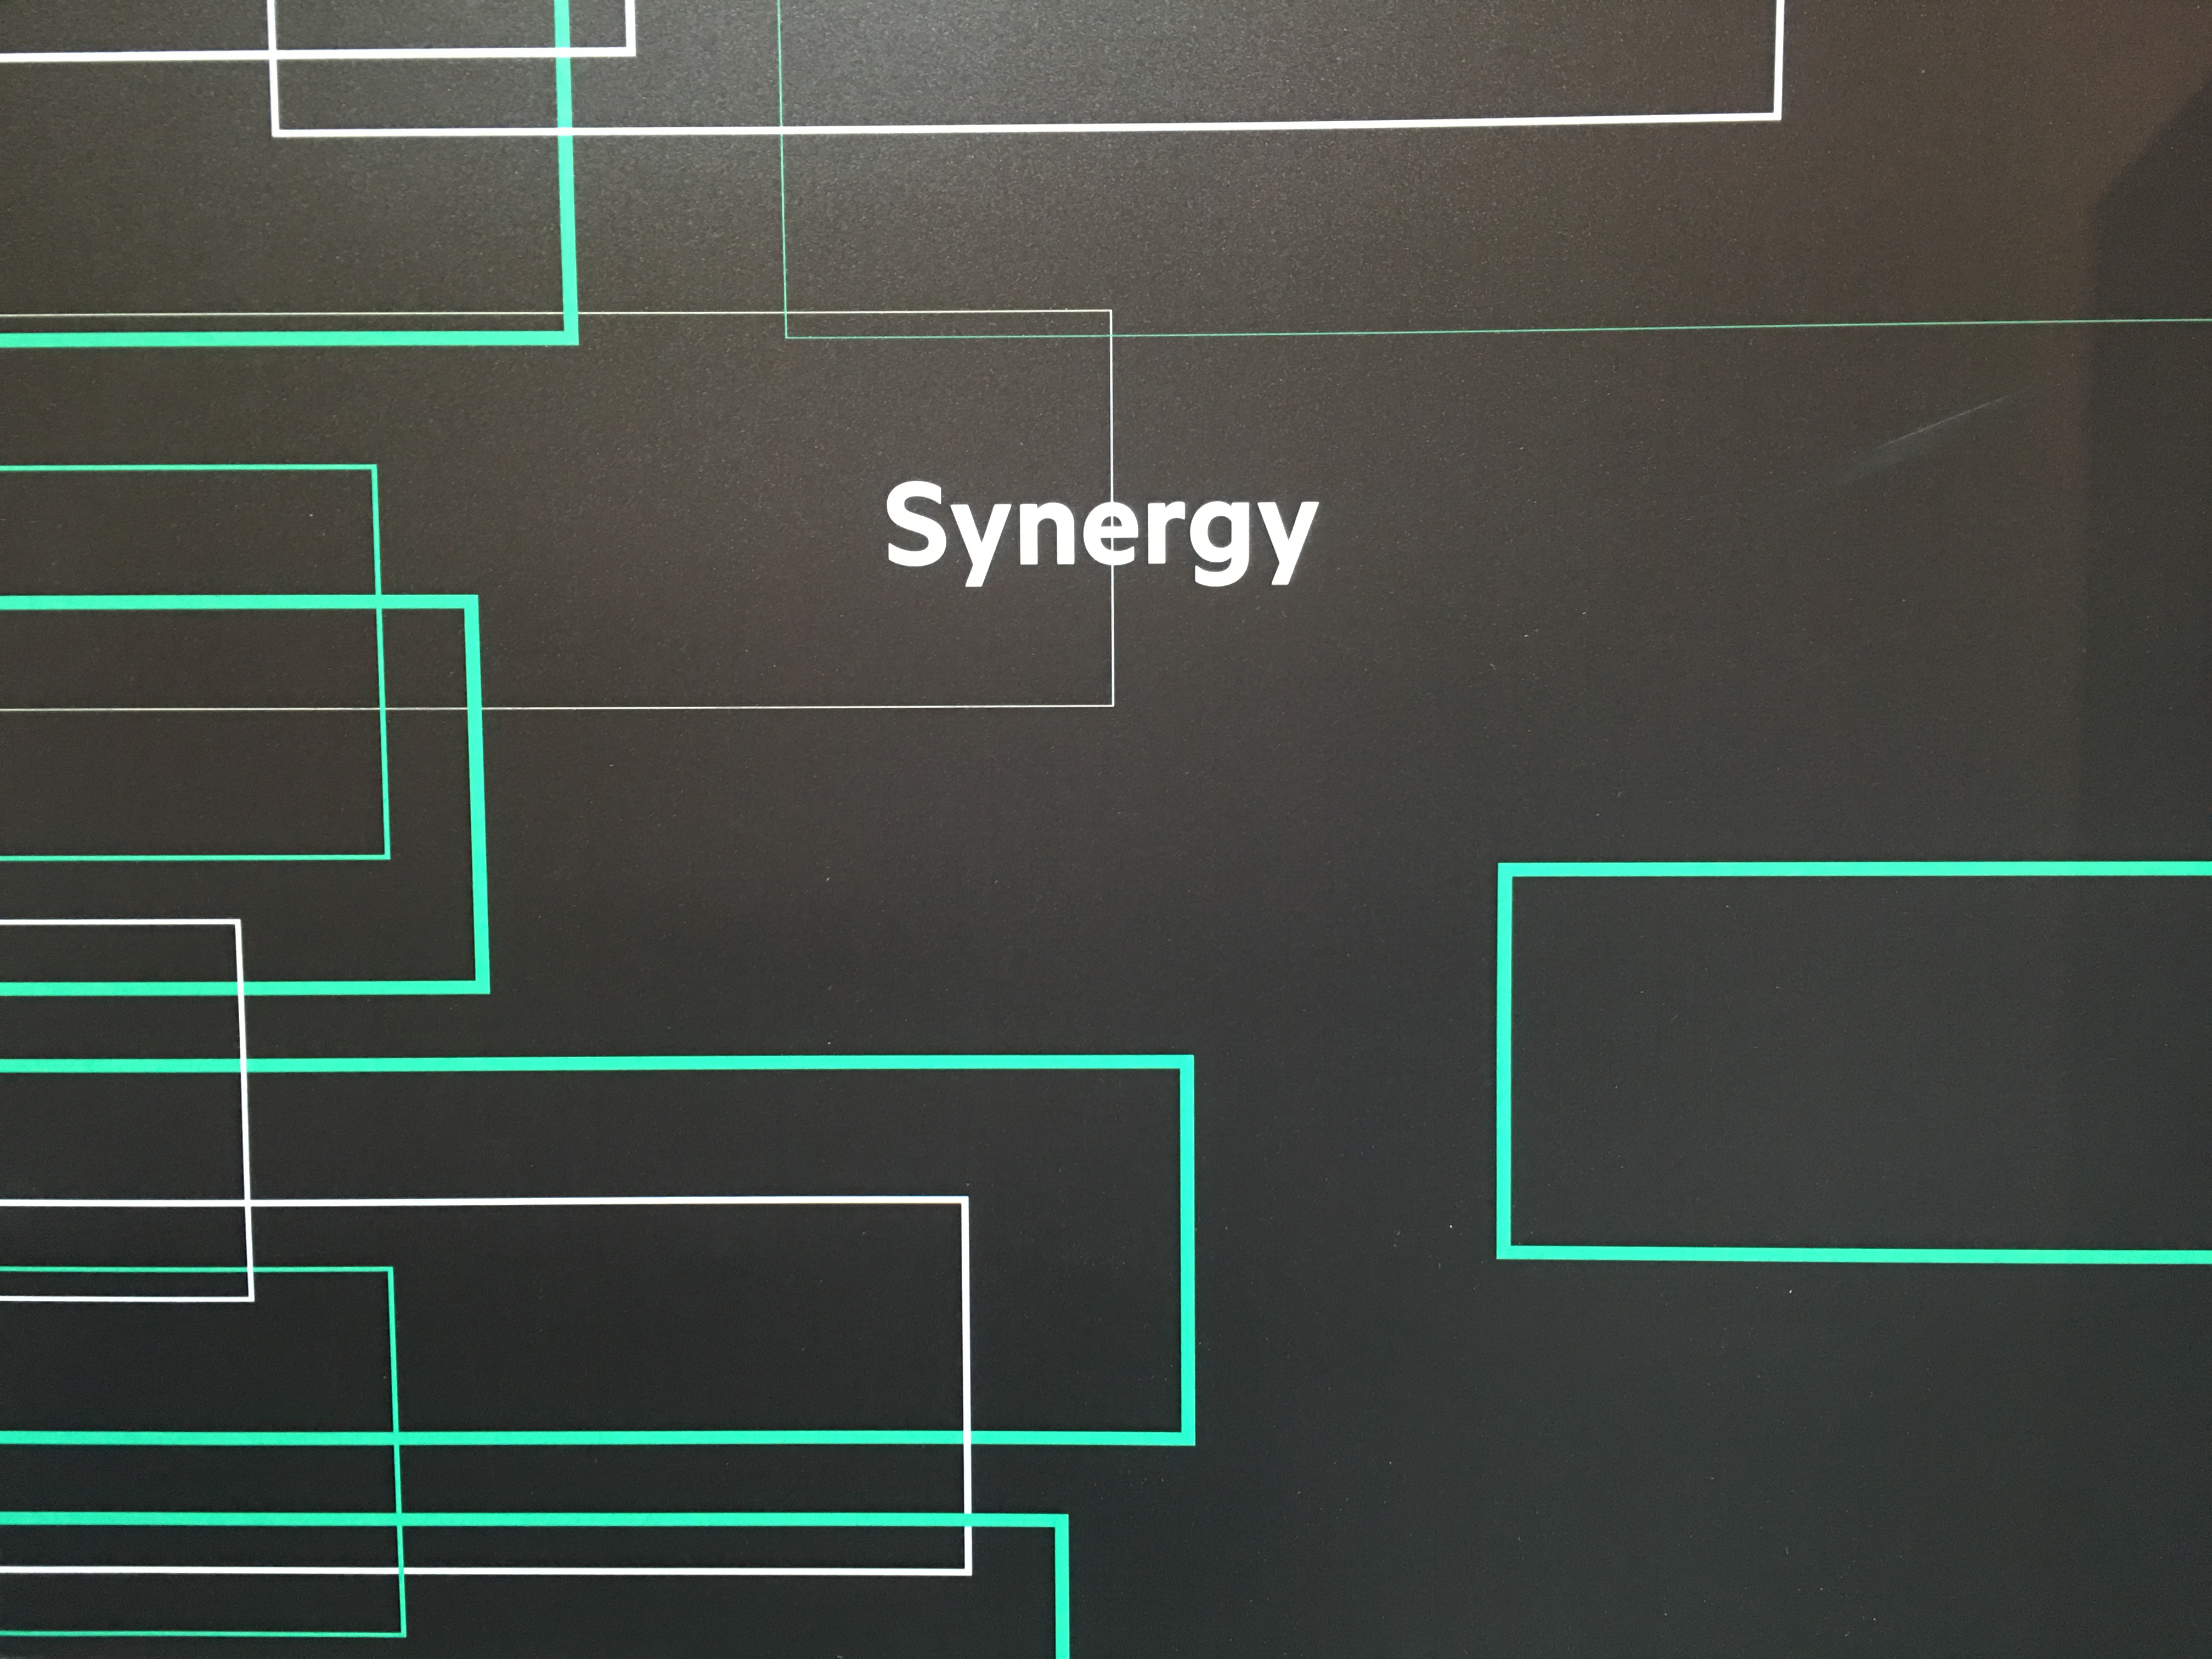 Hpe Announces Synergy, The Hardware Platform Behind - Hpe Server , HD Wallpaper & Backgrounds